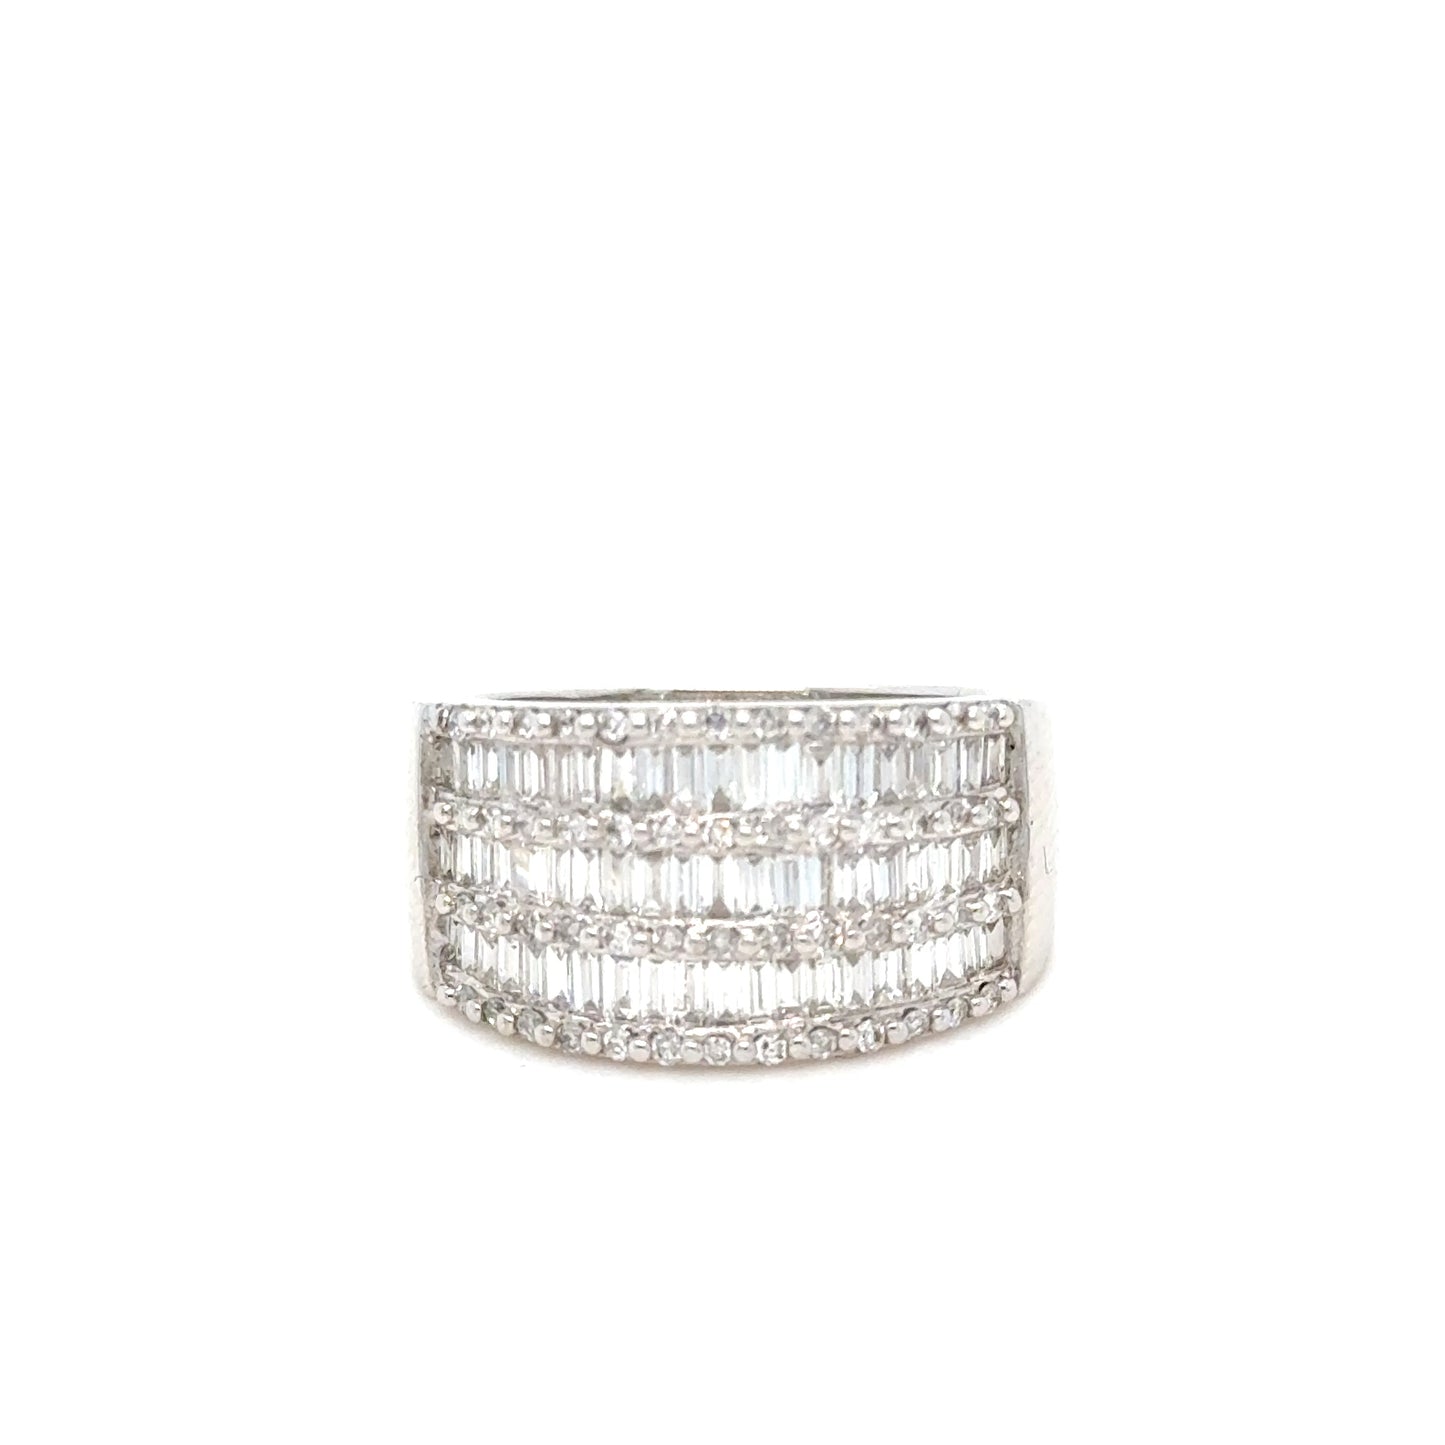 1.36 CT Baguette & Round Brilliant Cut Diamonds in a 14 KT White Gold Band